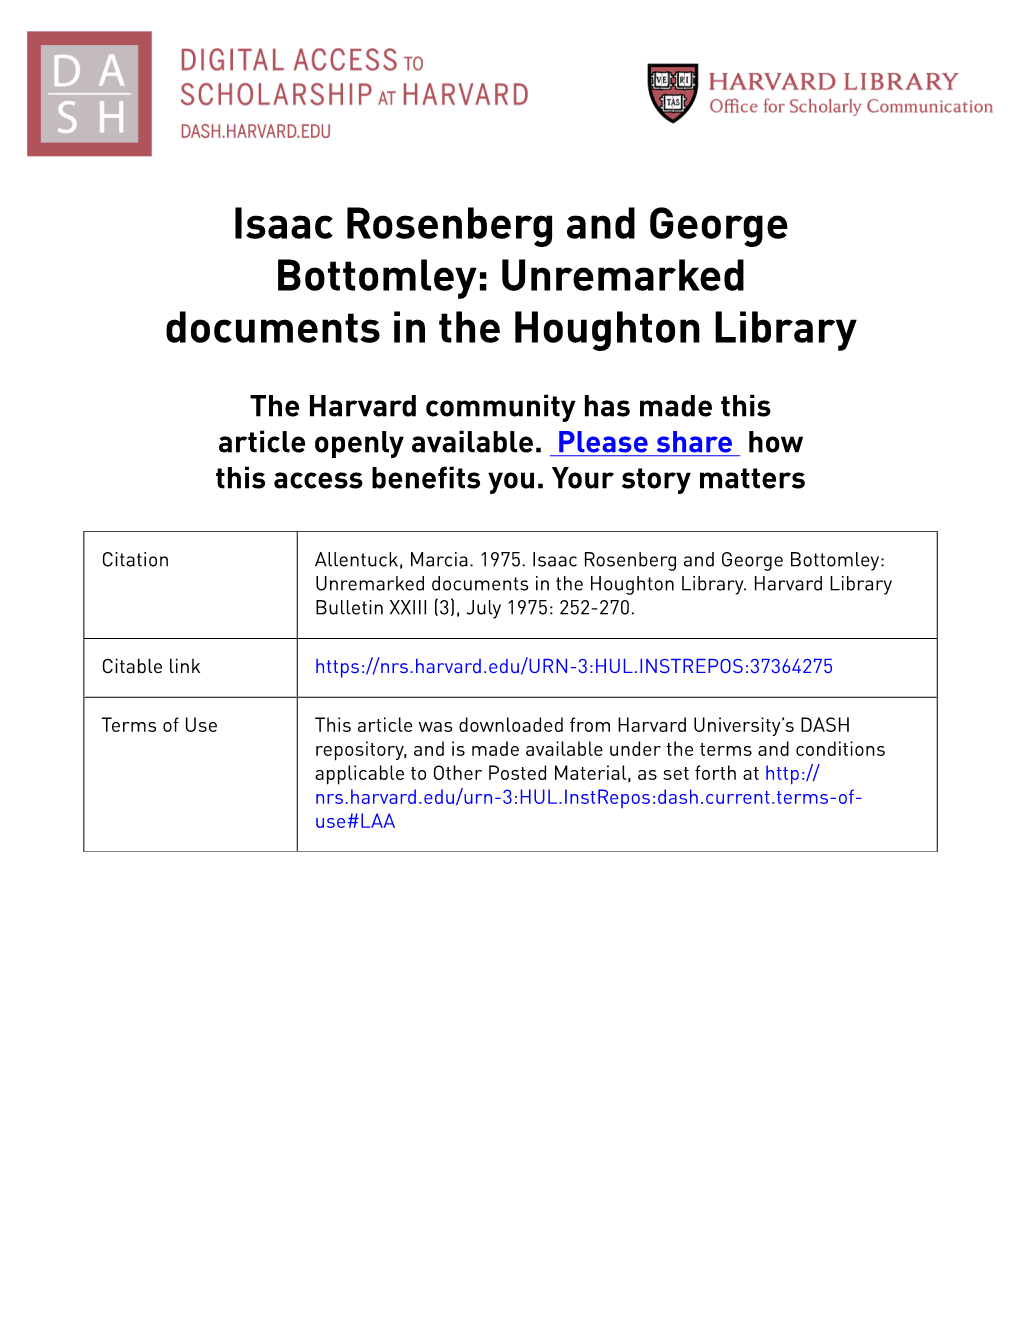 Unremarked Documents in the Houghton Library